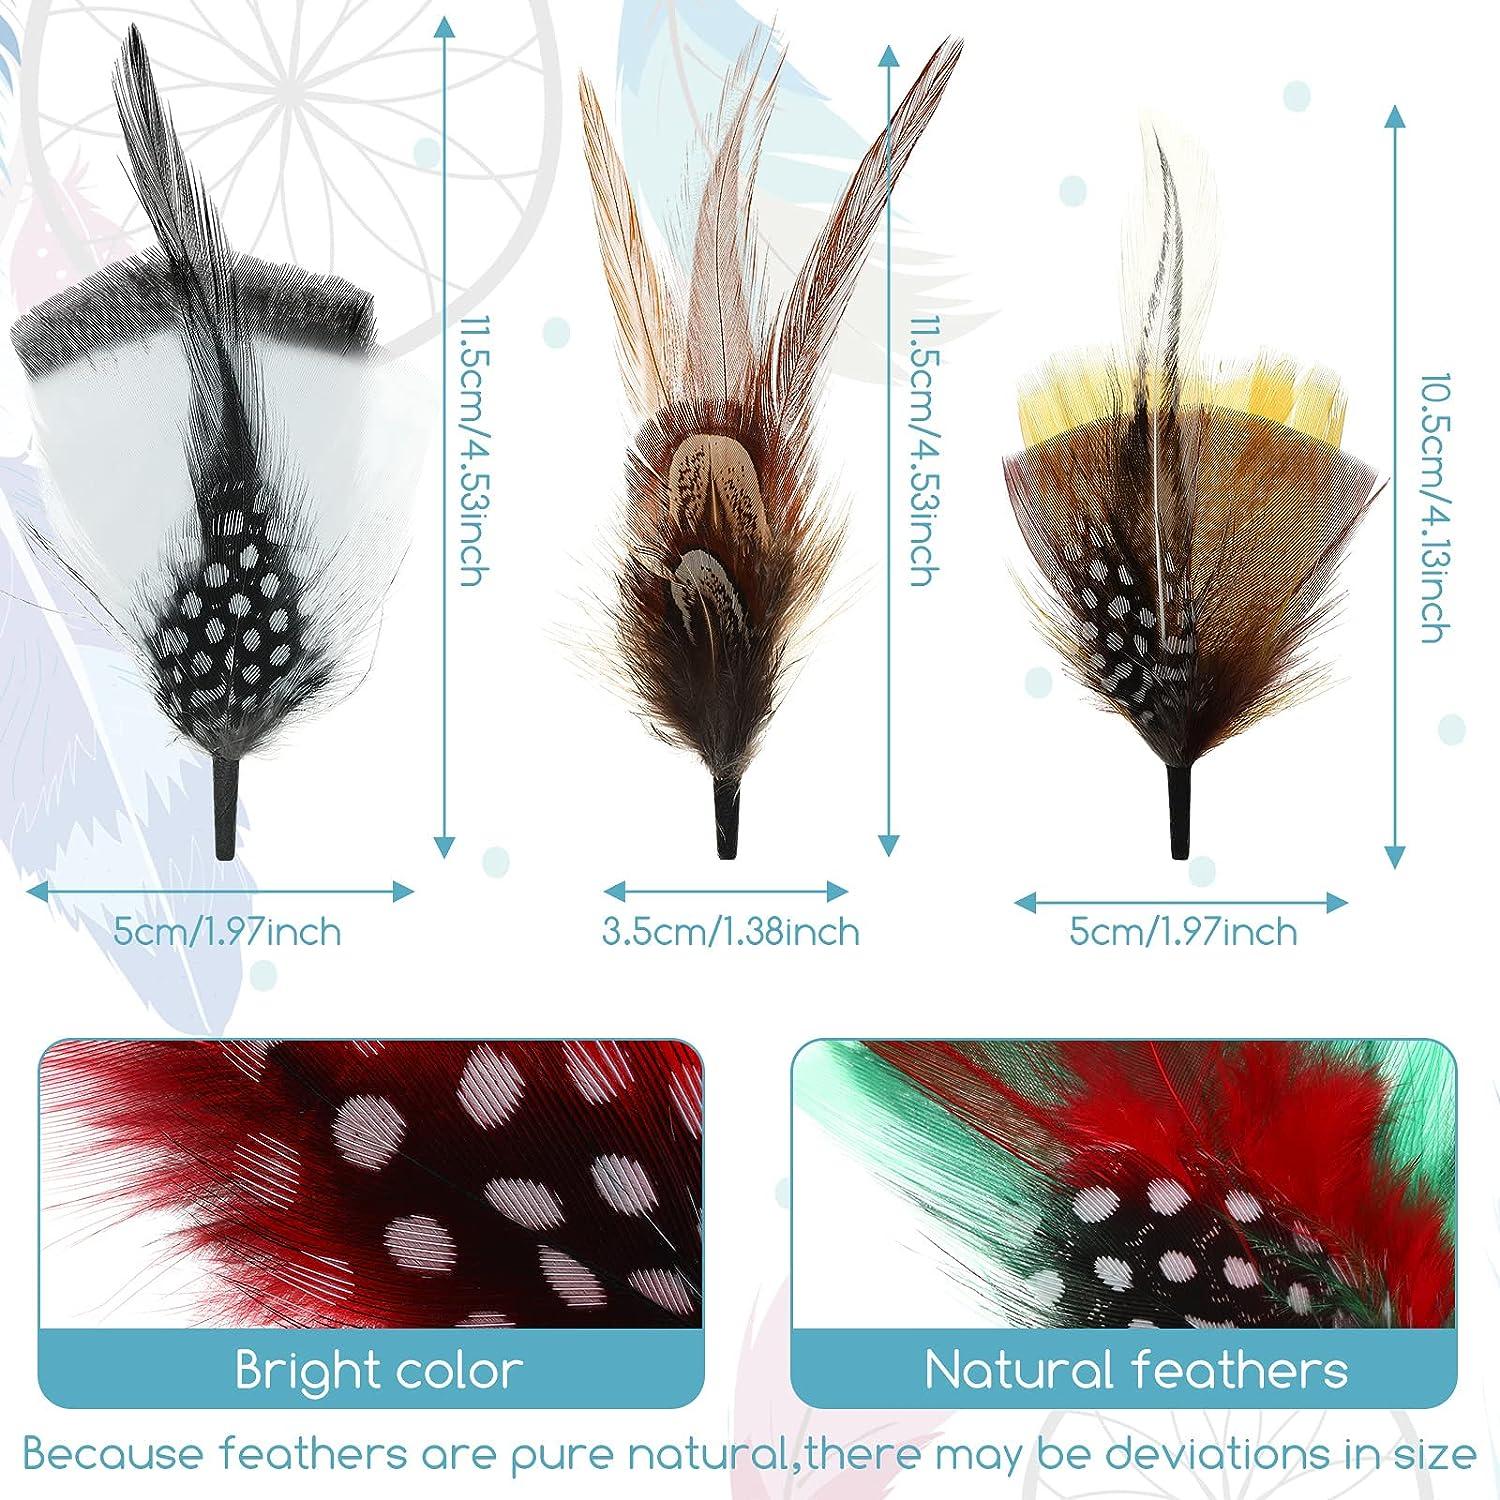 20 Pcs Hat Feathers Assorted Feathers for Fedora Hats Colorful